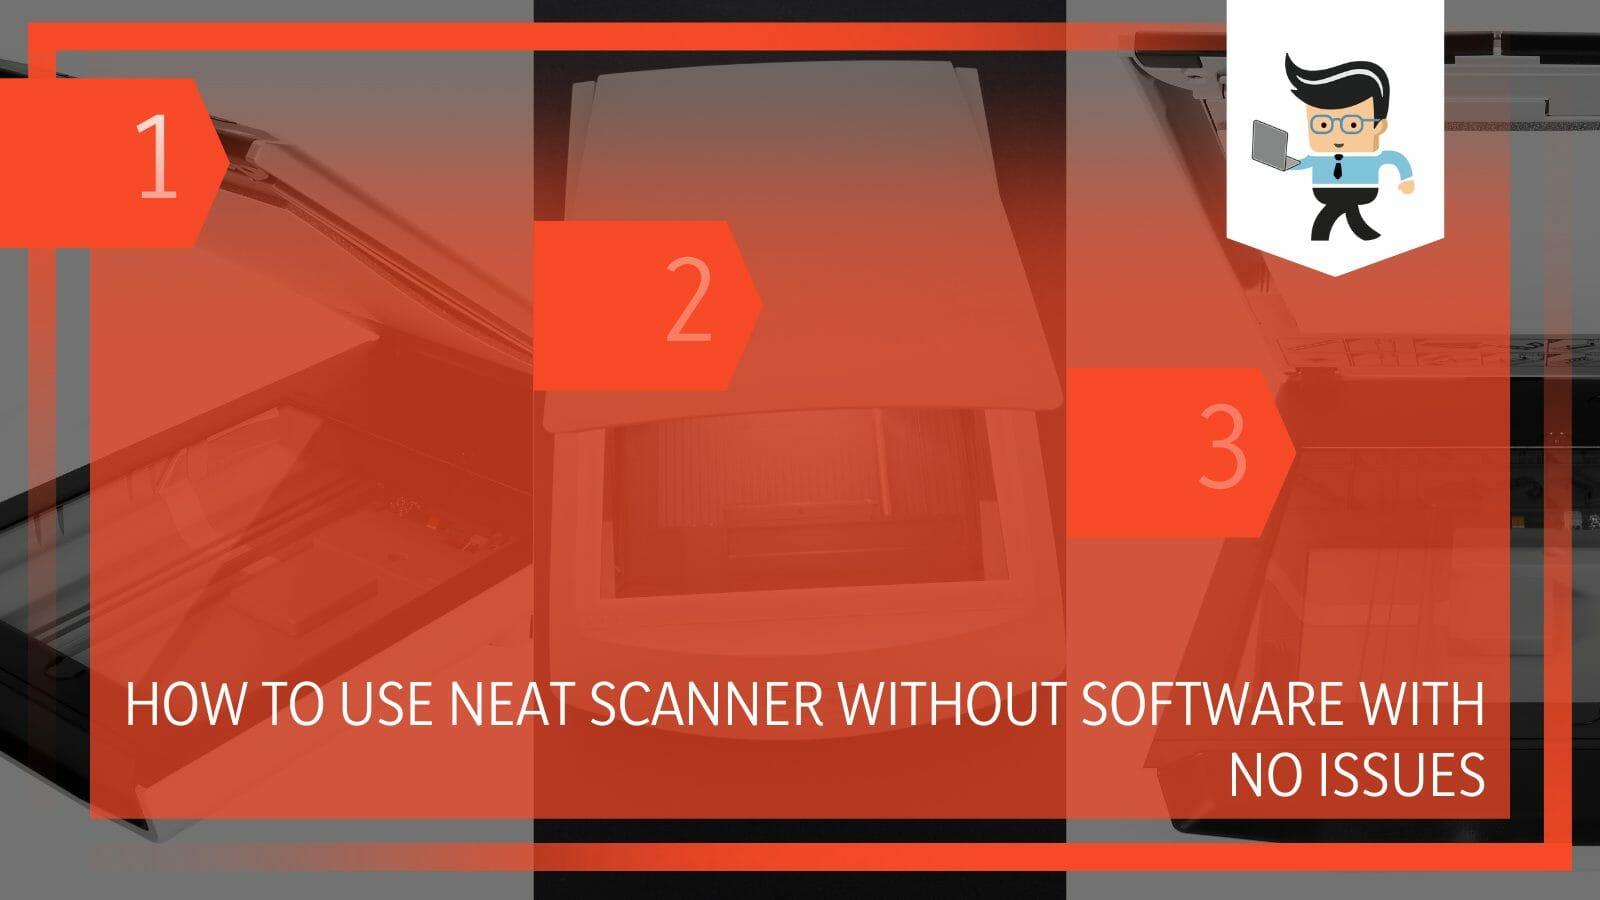 Use Neat Scanner Without Software With No Issues